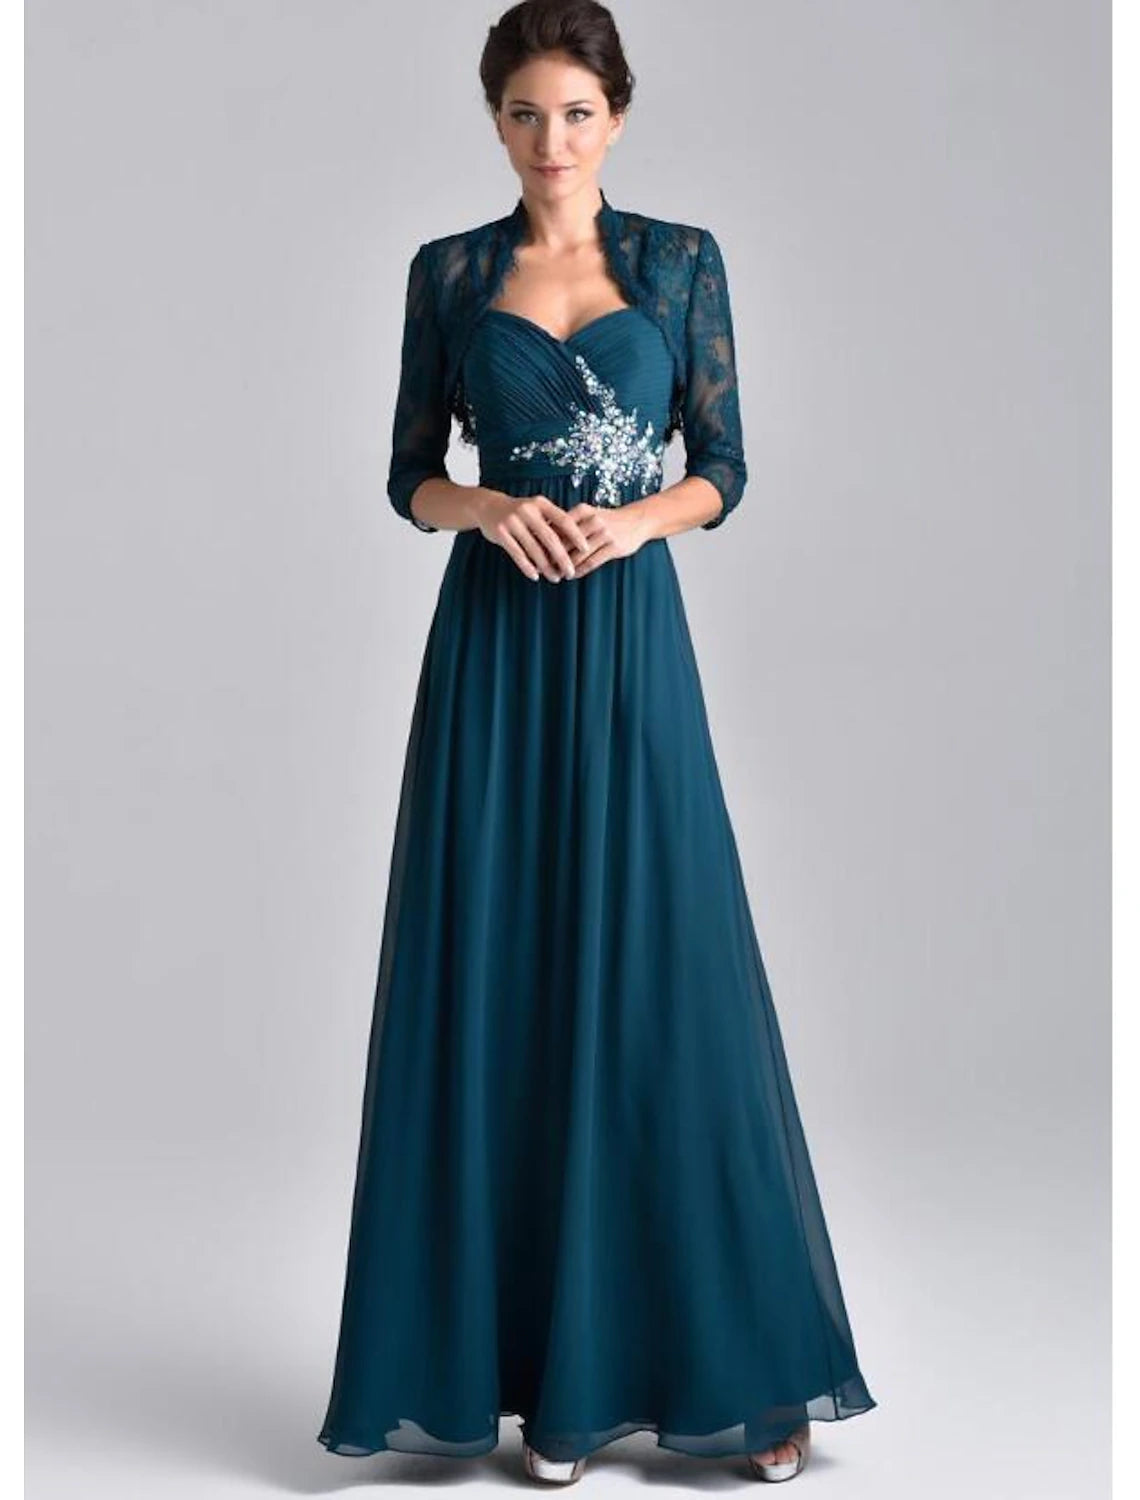 Two Piece A-Line Mother of the Bride Dress Elegant Spaghetti Strap Floor Length Chiffon Lace 3/4 Length Sleeve Wrap Included with Embroidery